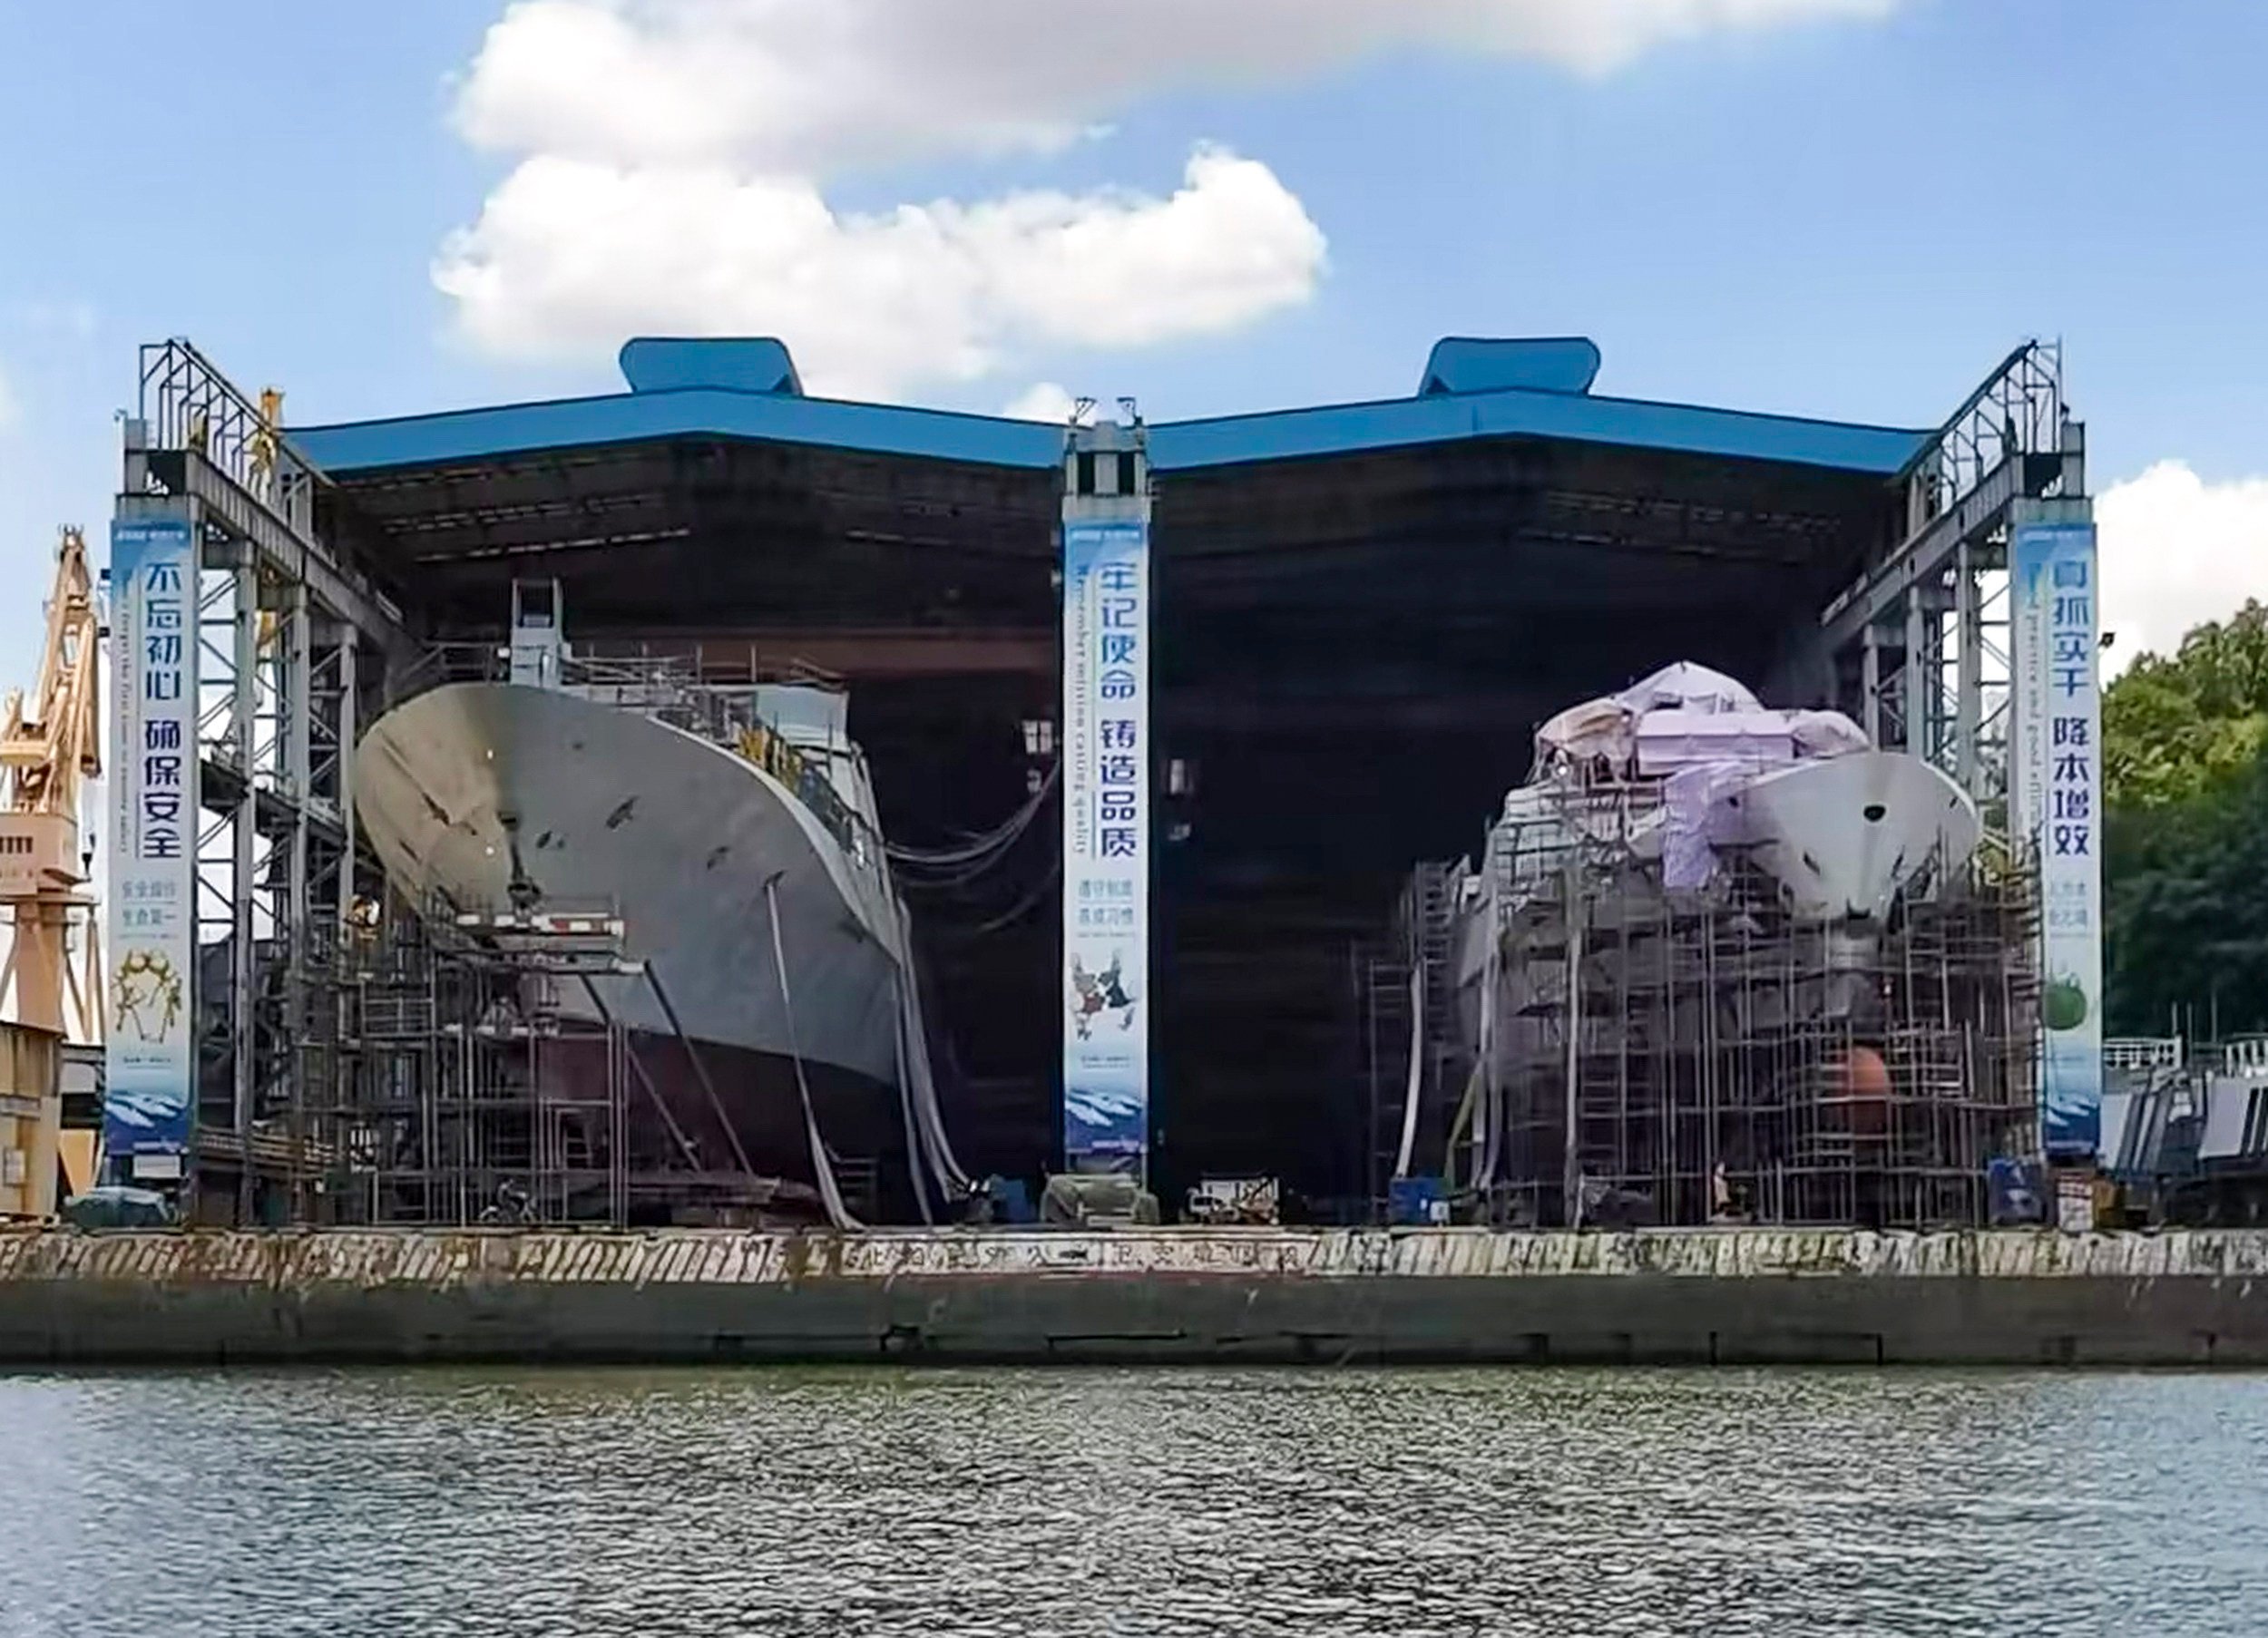 A Type 054B frigate (left) is nearly completed at a drydock in a Guangzhou shipyard. It is docked next to a smaller Type 054A that is being built for the Chinese coastguard. Photo: Sina Weibo